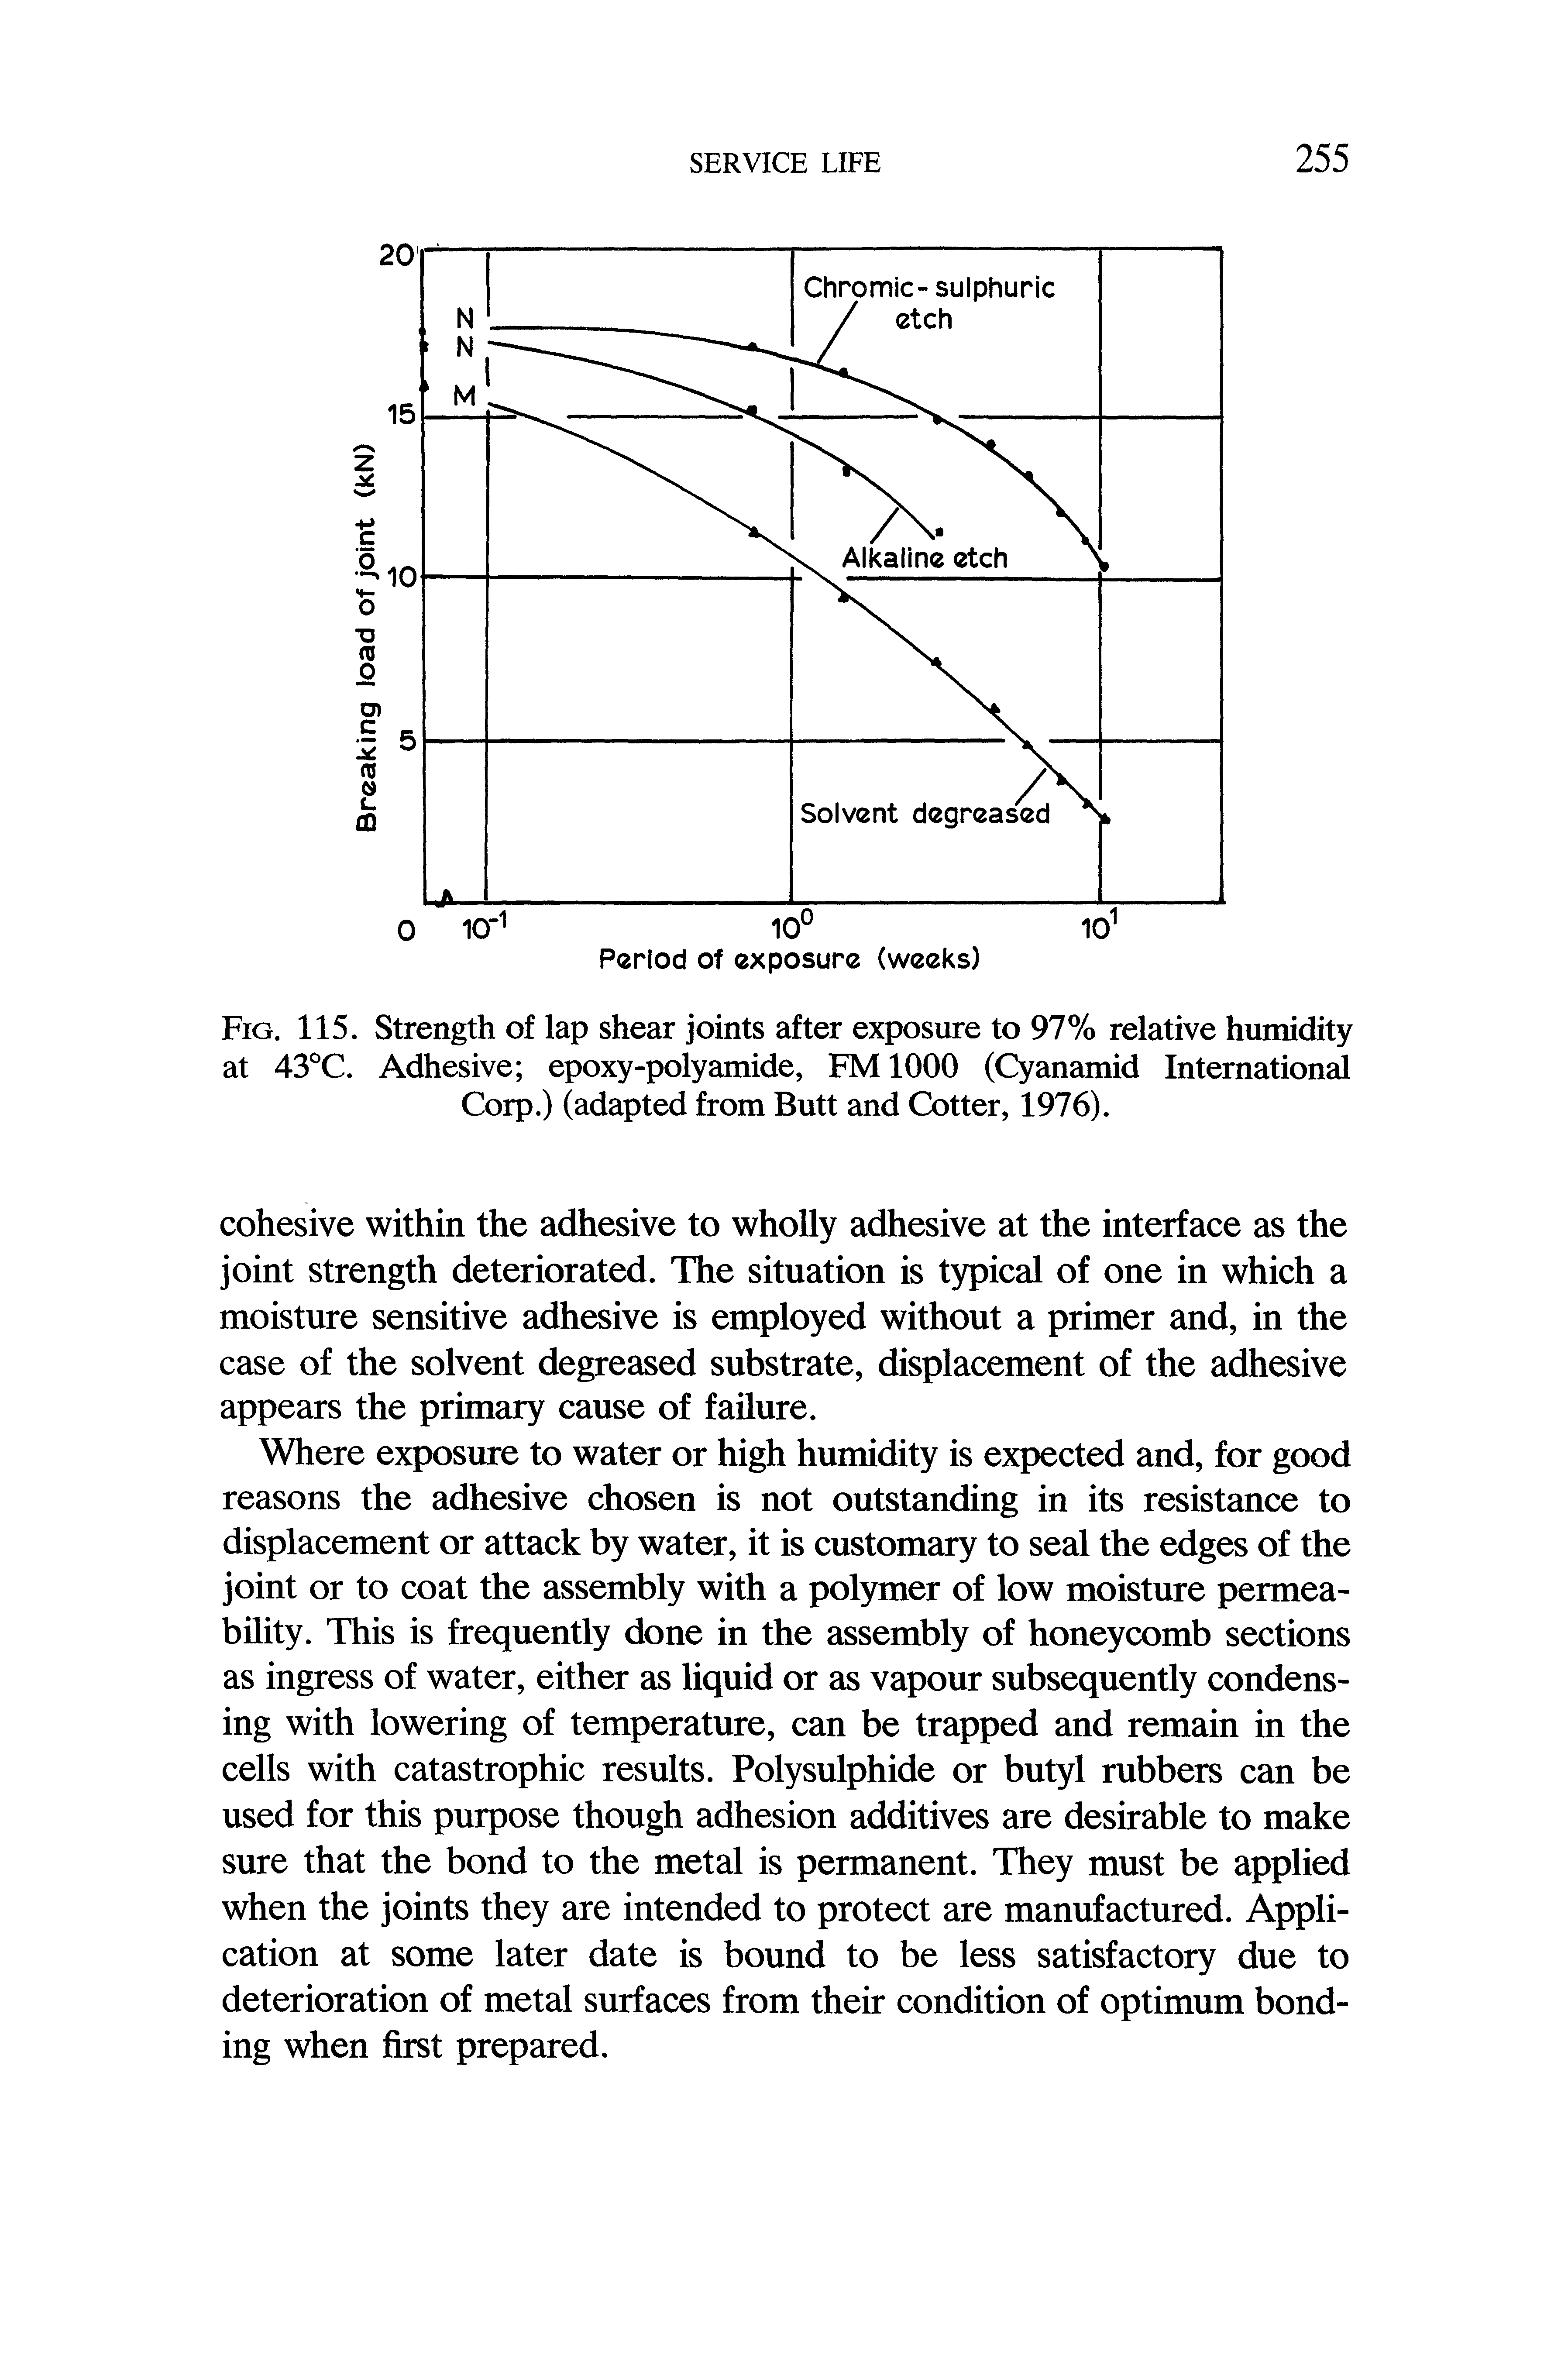 Fig. 115. Strength of lap shear joints after exposure to 97% relative humidity at 43°C. Adhesive epoxy-polyamide, FMIOOO (Cyanamid International Corp.) (adapted from Butt and Cotter, 1976).